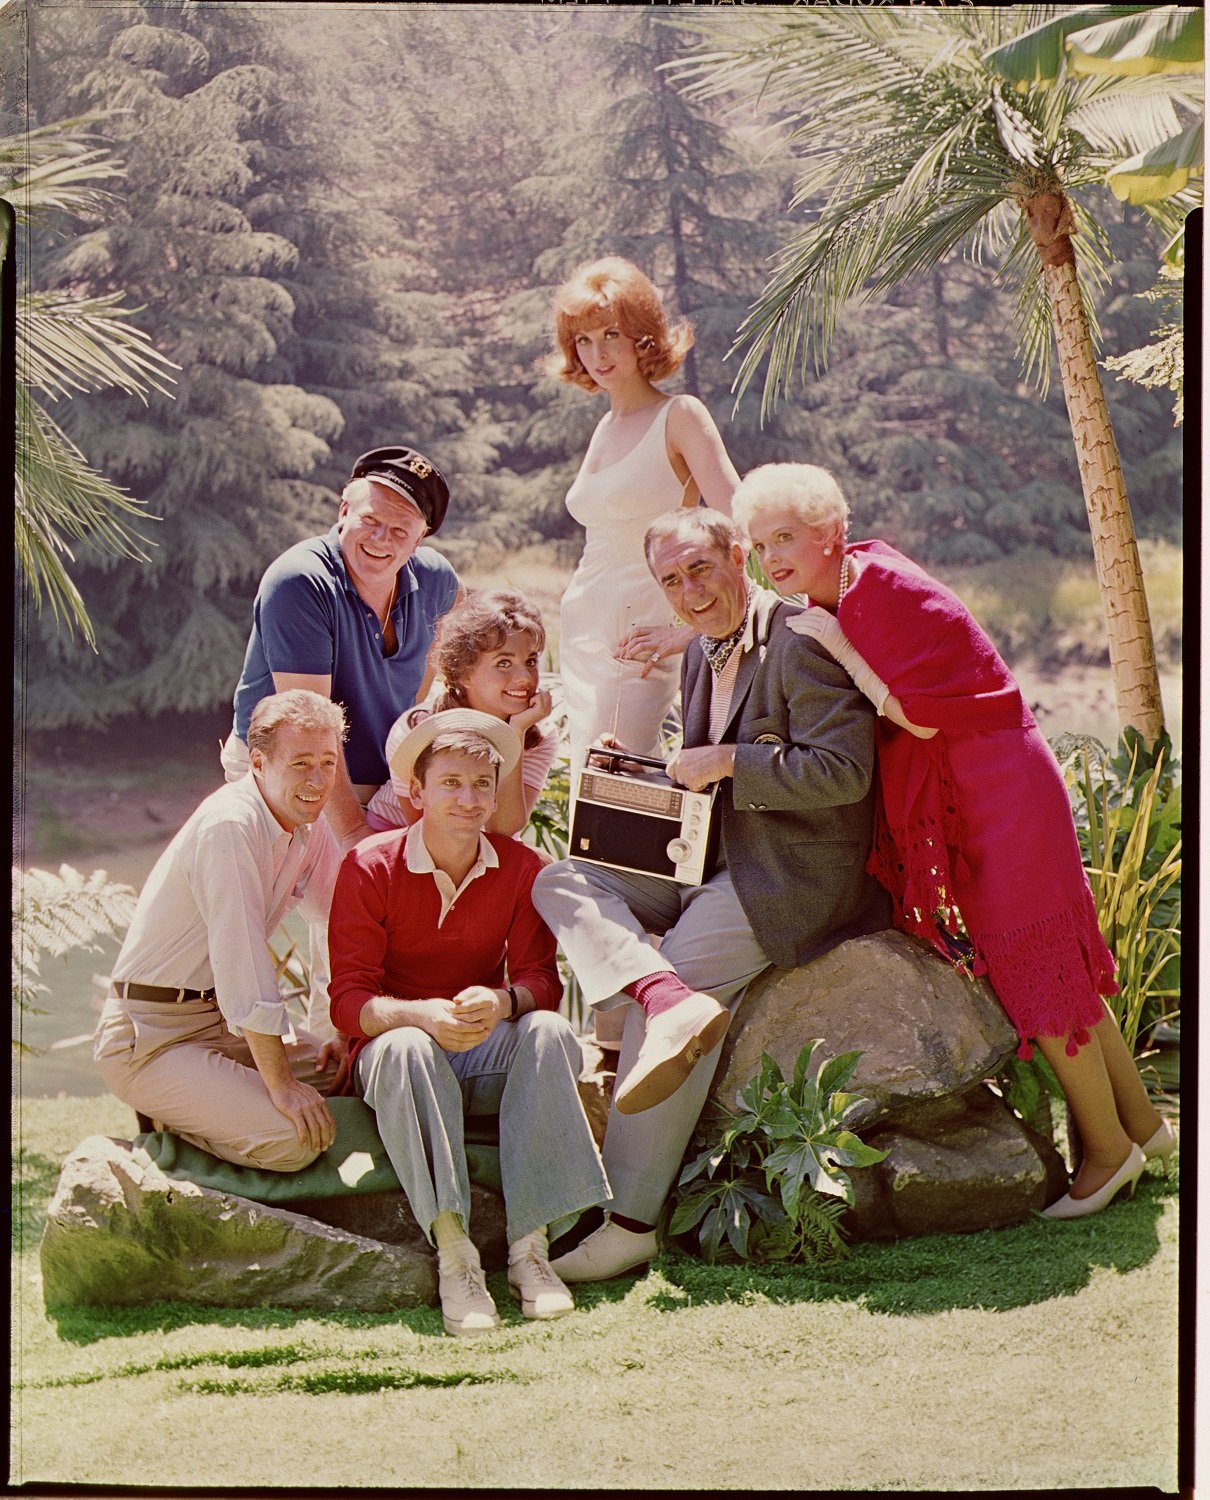 the cast of 'Gilligan's Island'